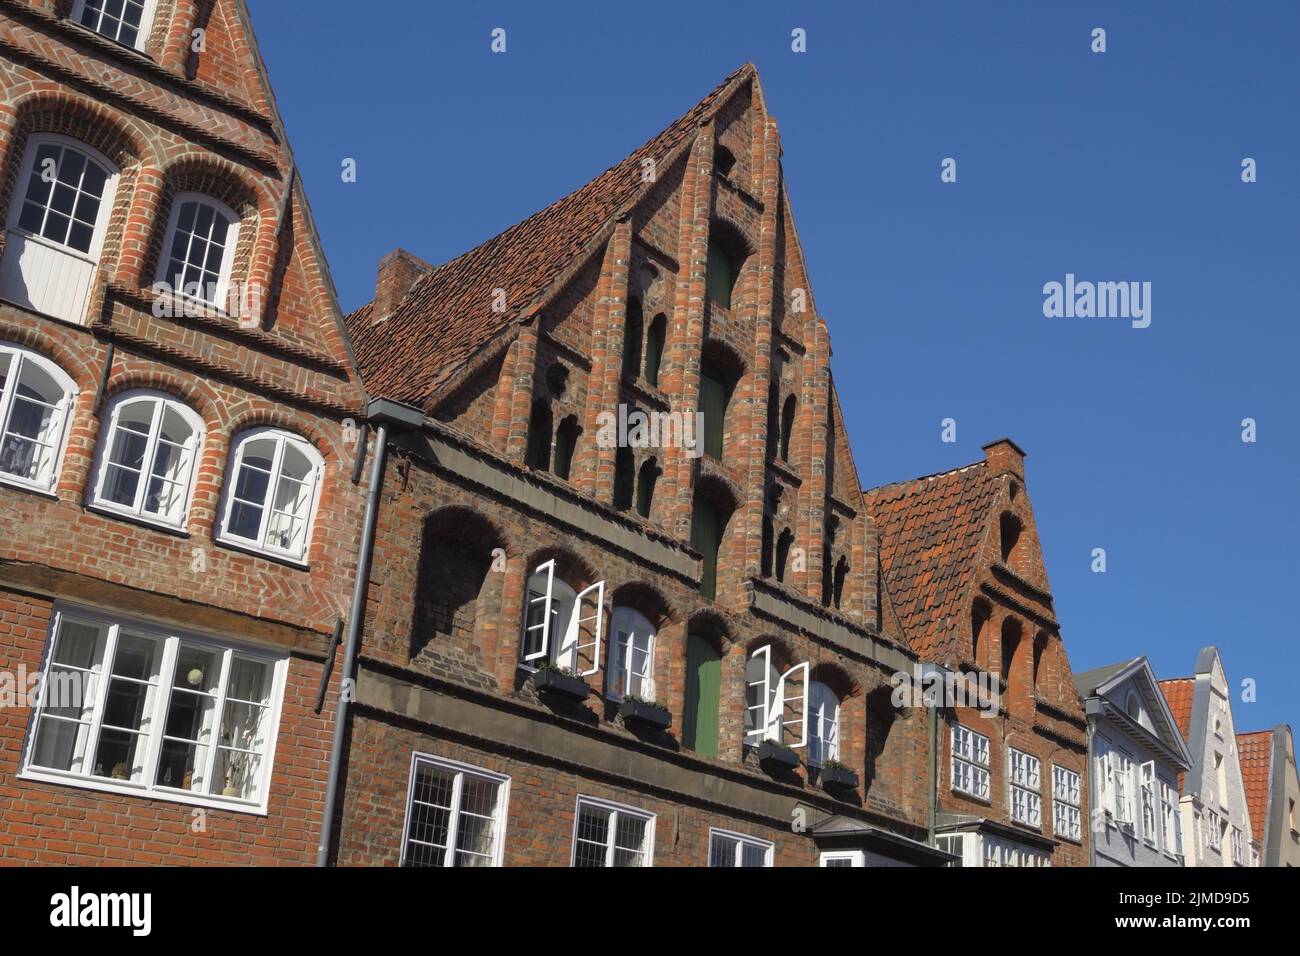 LÃ¼neburg - Old town houses, Germany Stock Photo